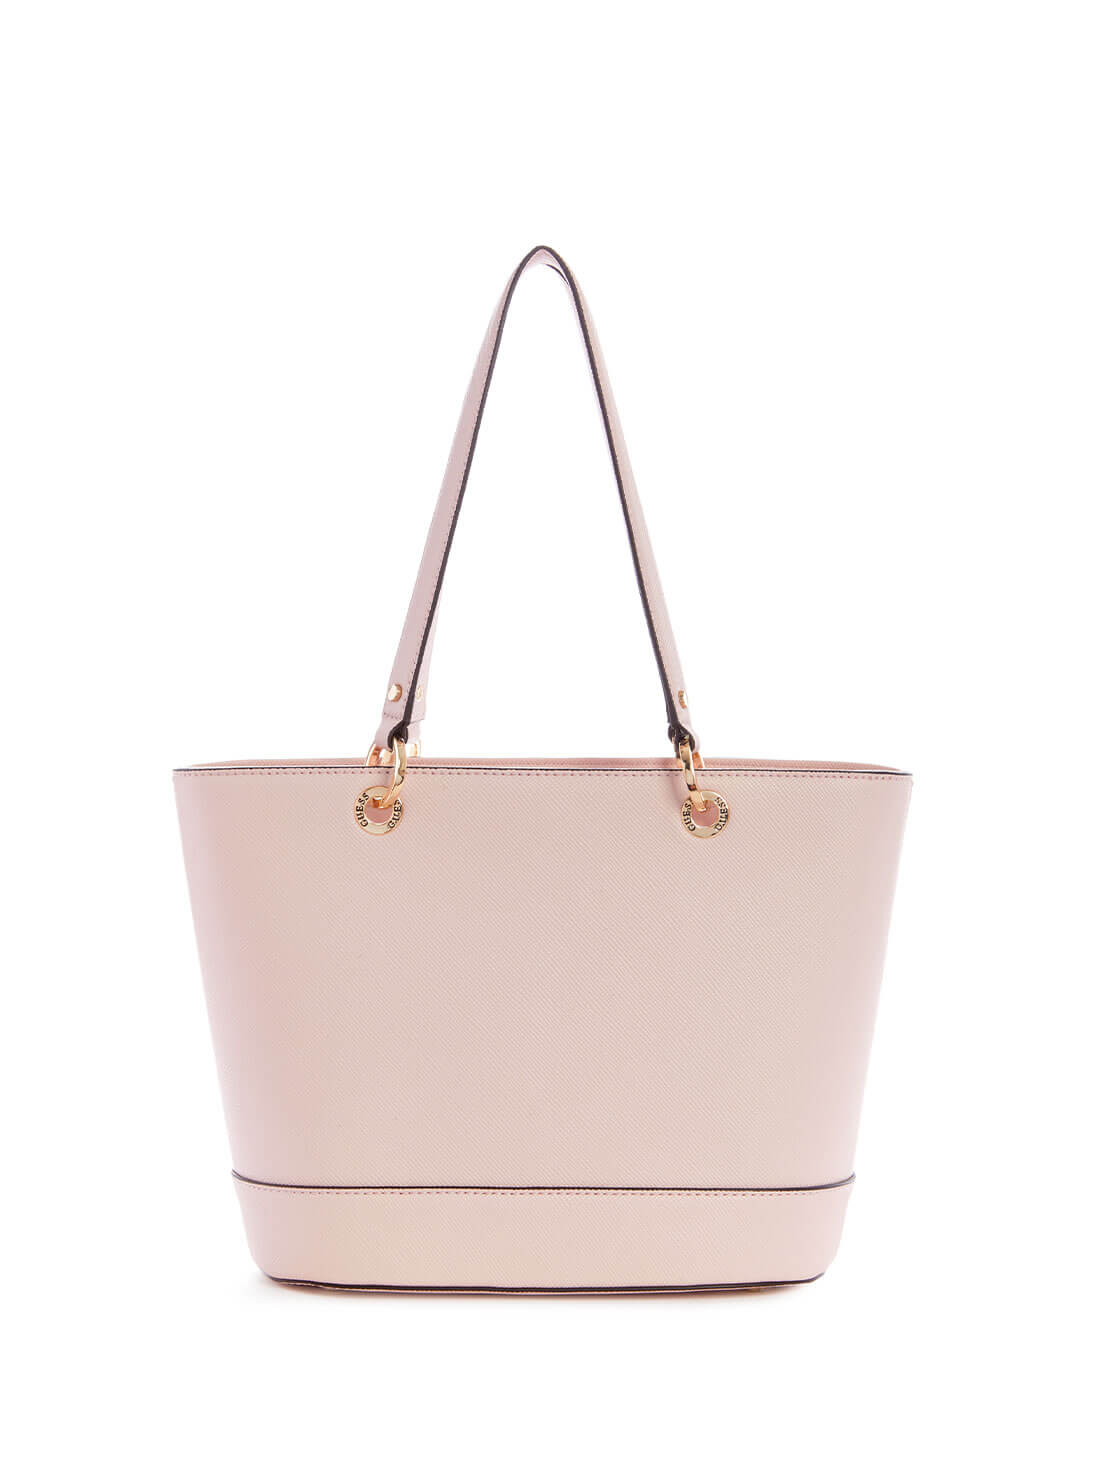 Light Pink Noelle Small Elite Tote Bag | GUESS Women's Handbags | back view